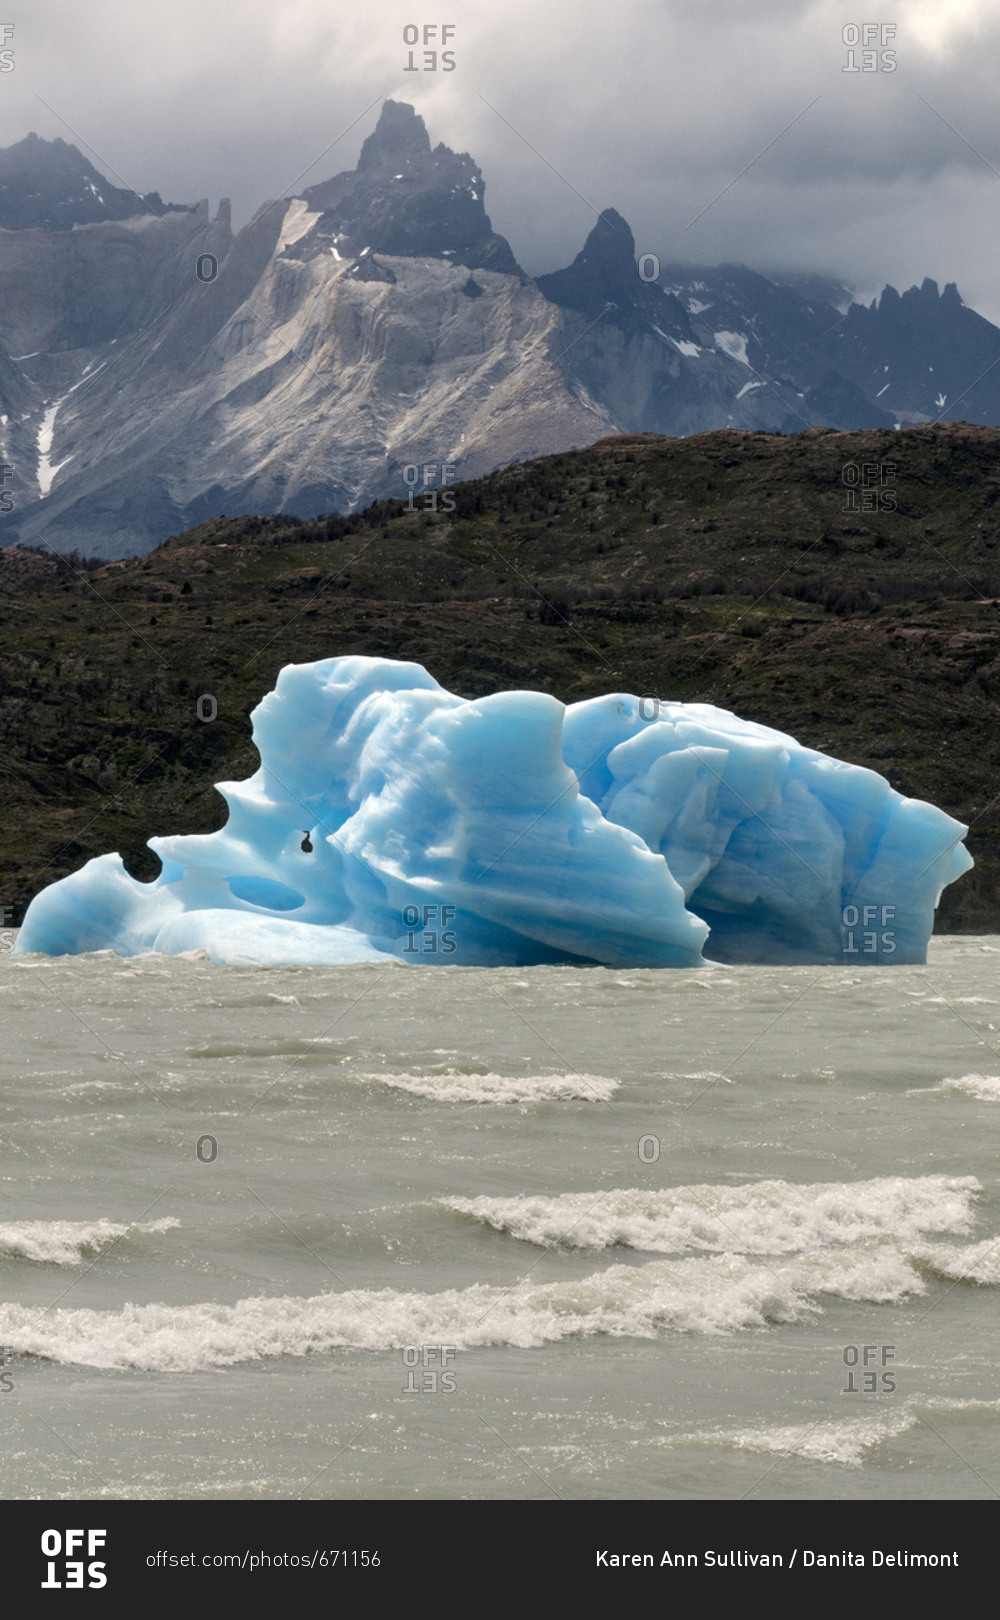 UNESCO World Heritage Site, Perito Moreno Glacier, Los Glaciares National Park, Argentina, South America, A large piece of blue ice in the foreground of mountains